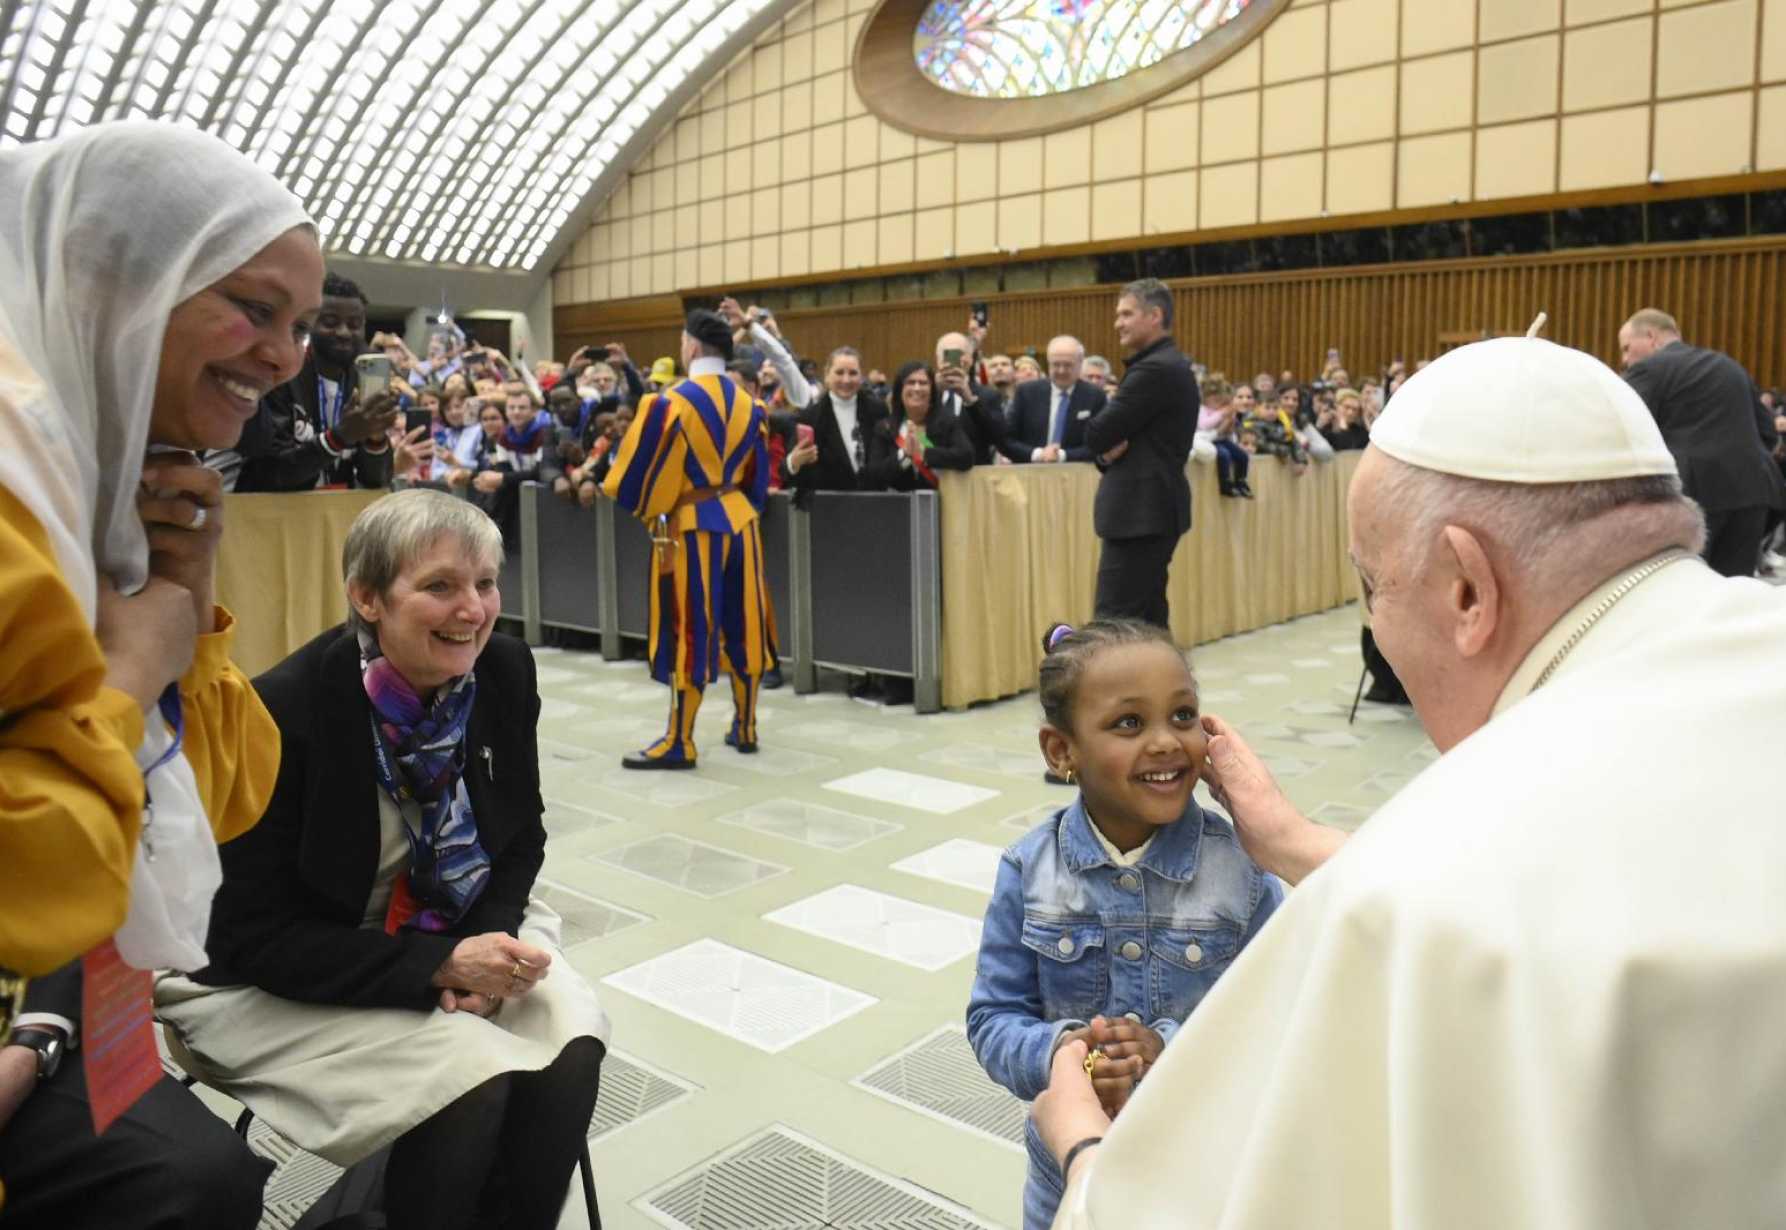 Welcoming migrants, refugees is first step toward peace, pope says